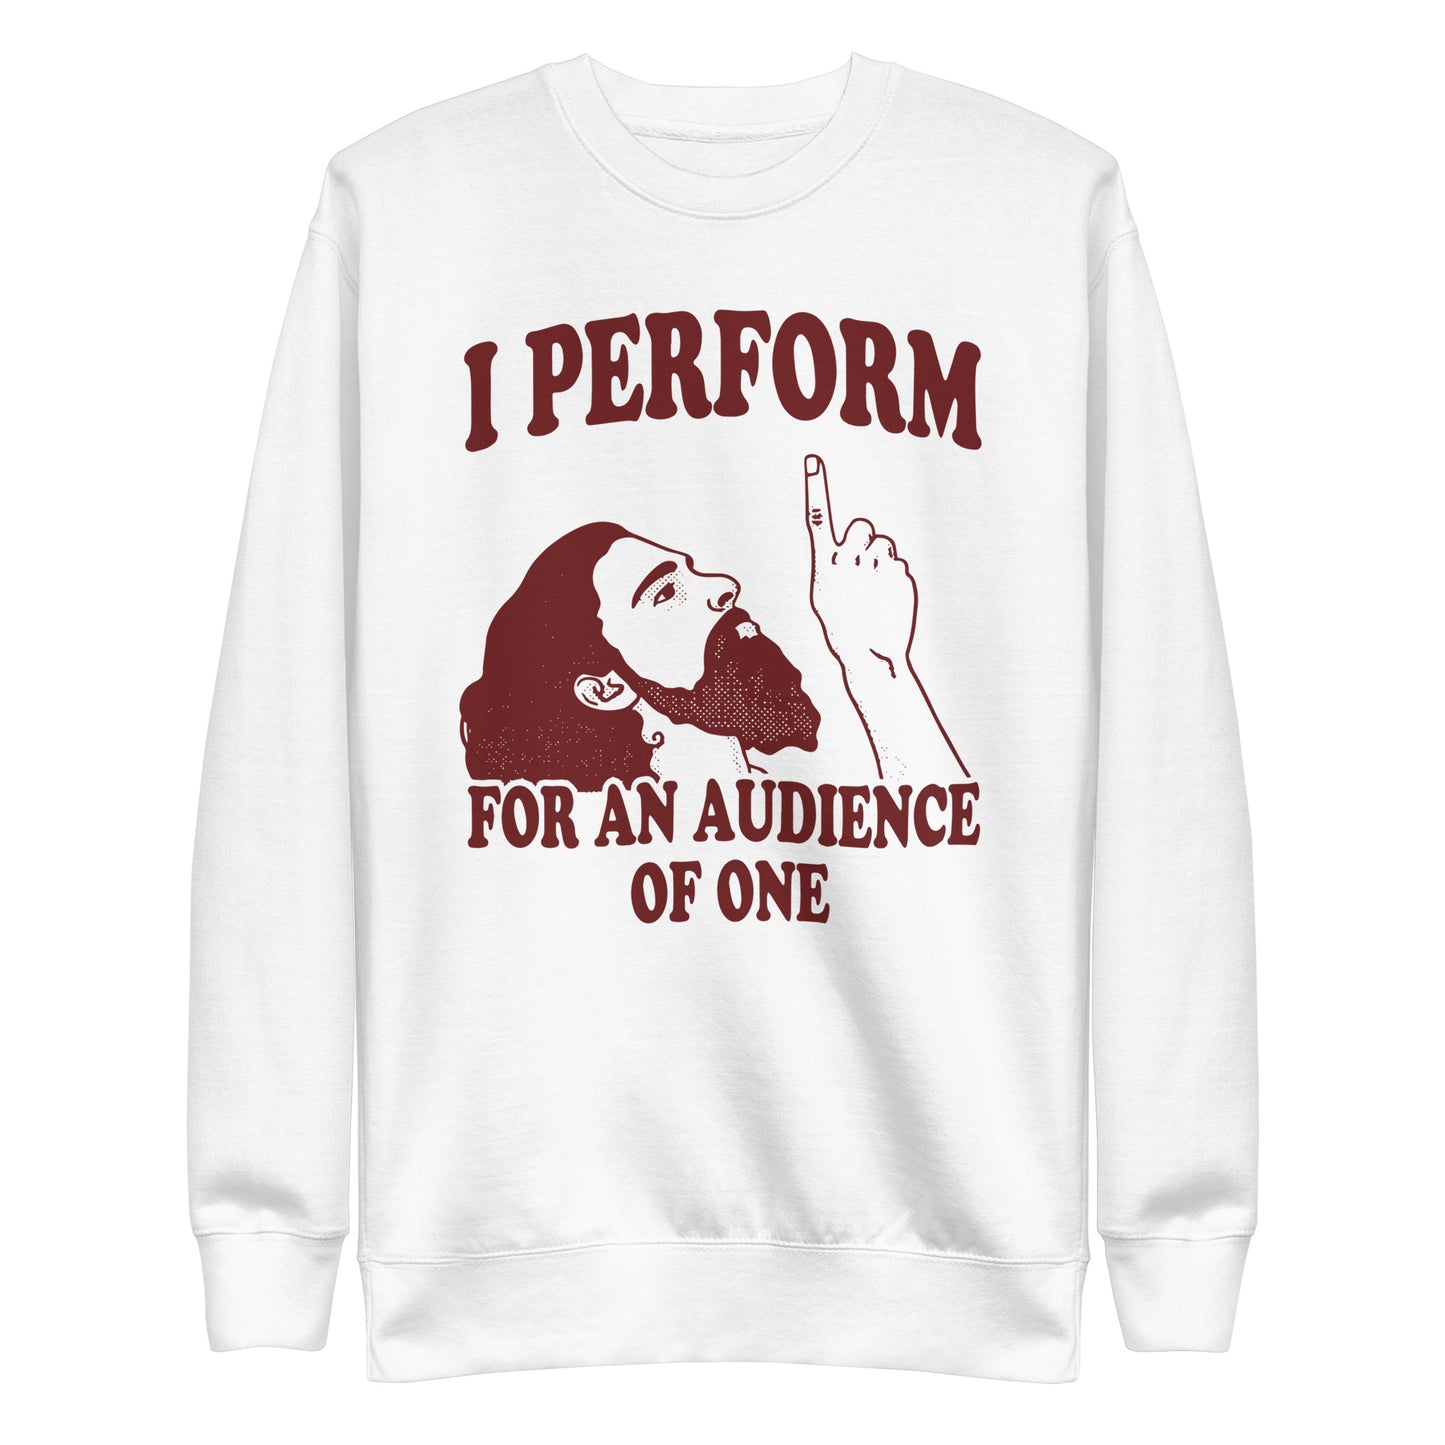 I Perform For An Audience of One Sweatshirt